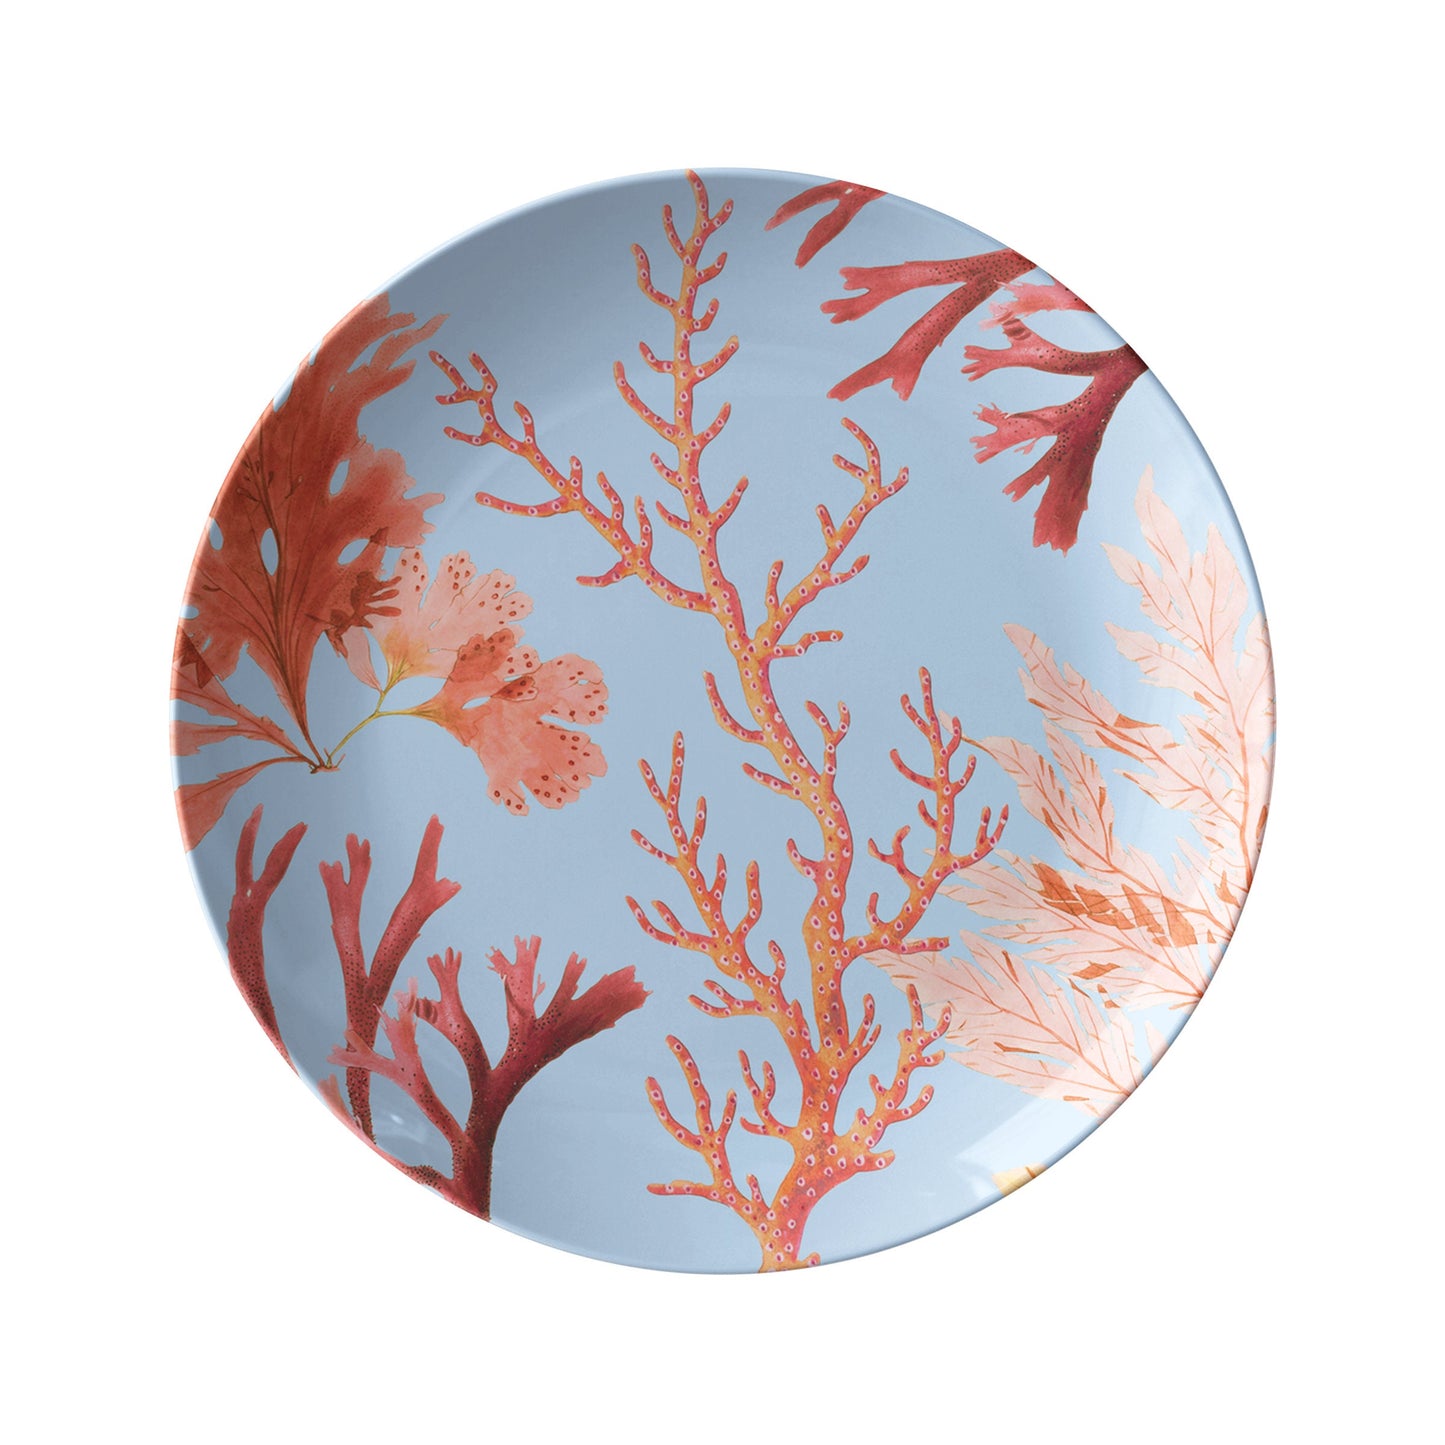 Coral Reef Nautical Plate Set features sea life plants and coral, Blue & Coral